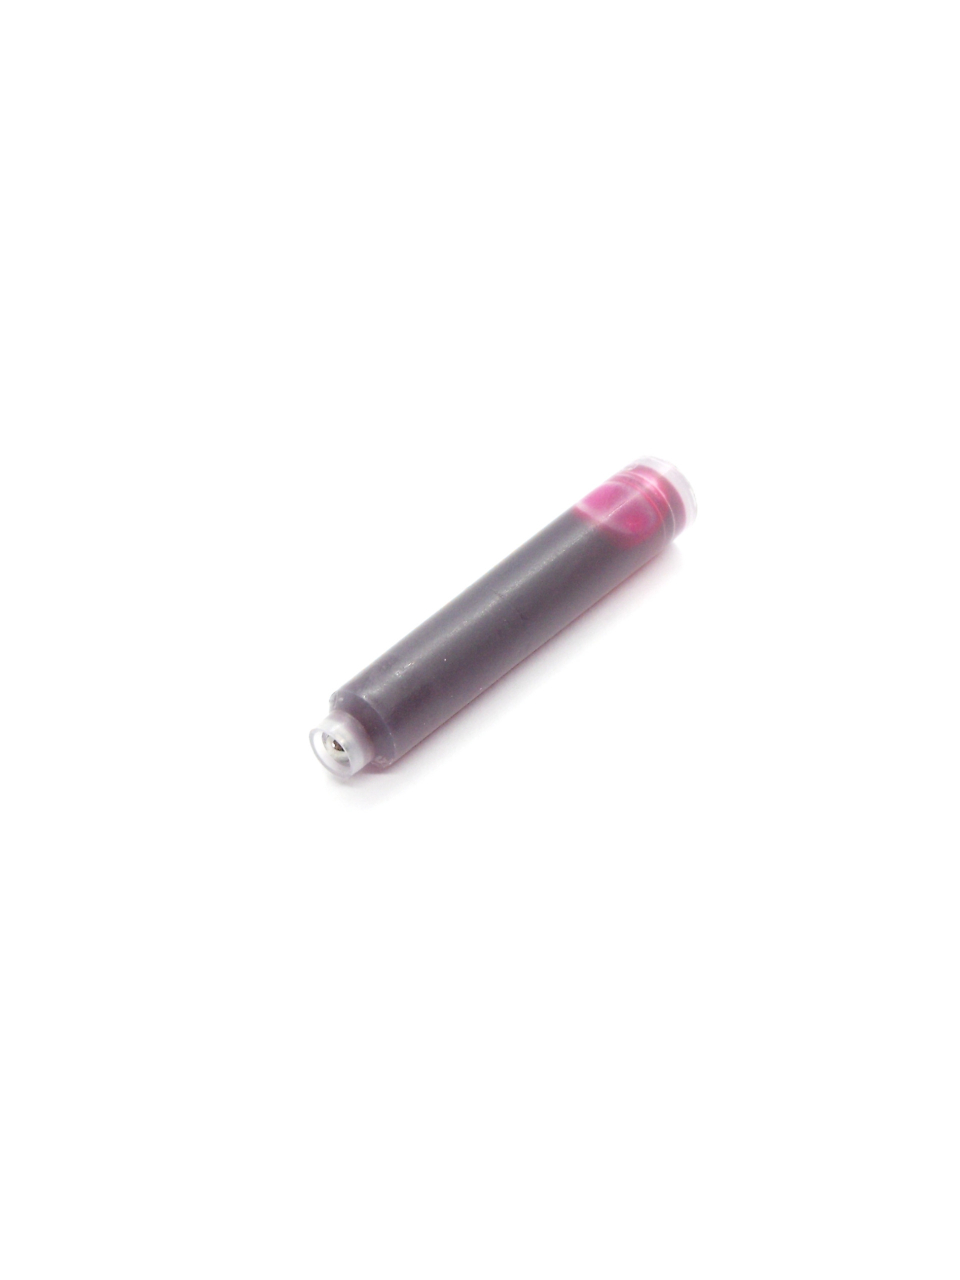 Cartridges For Hauser Fountain Pens (Pink)